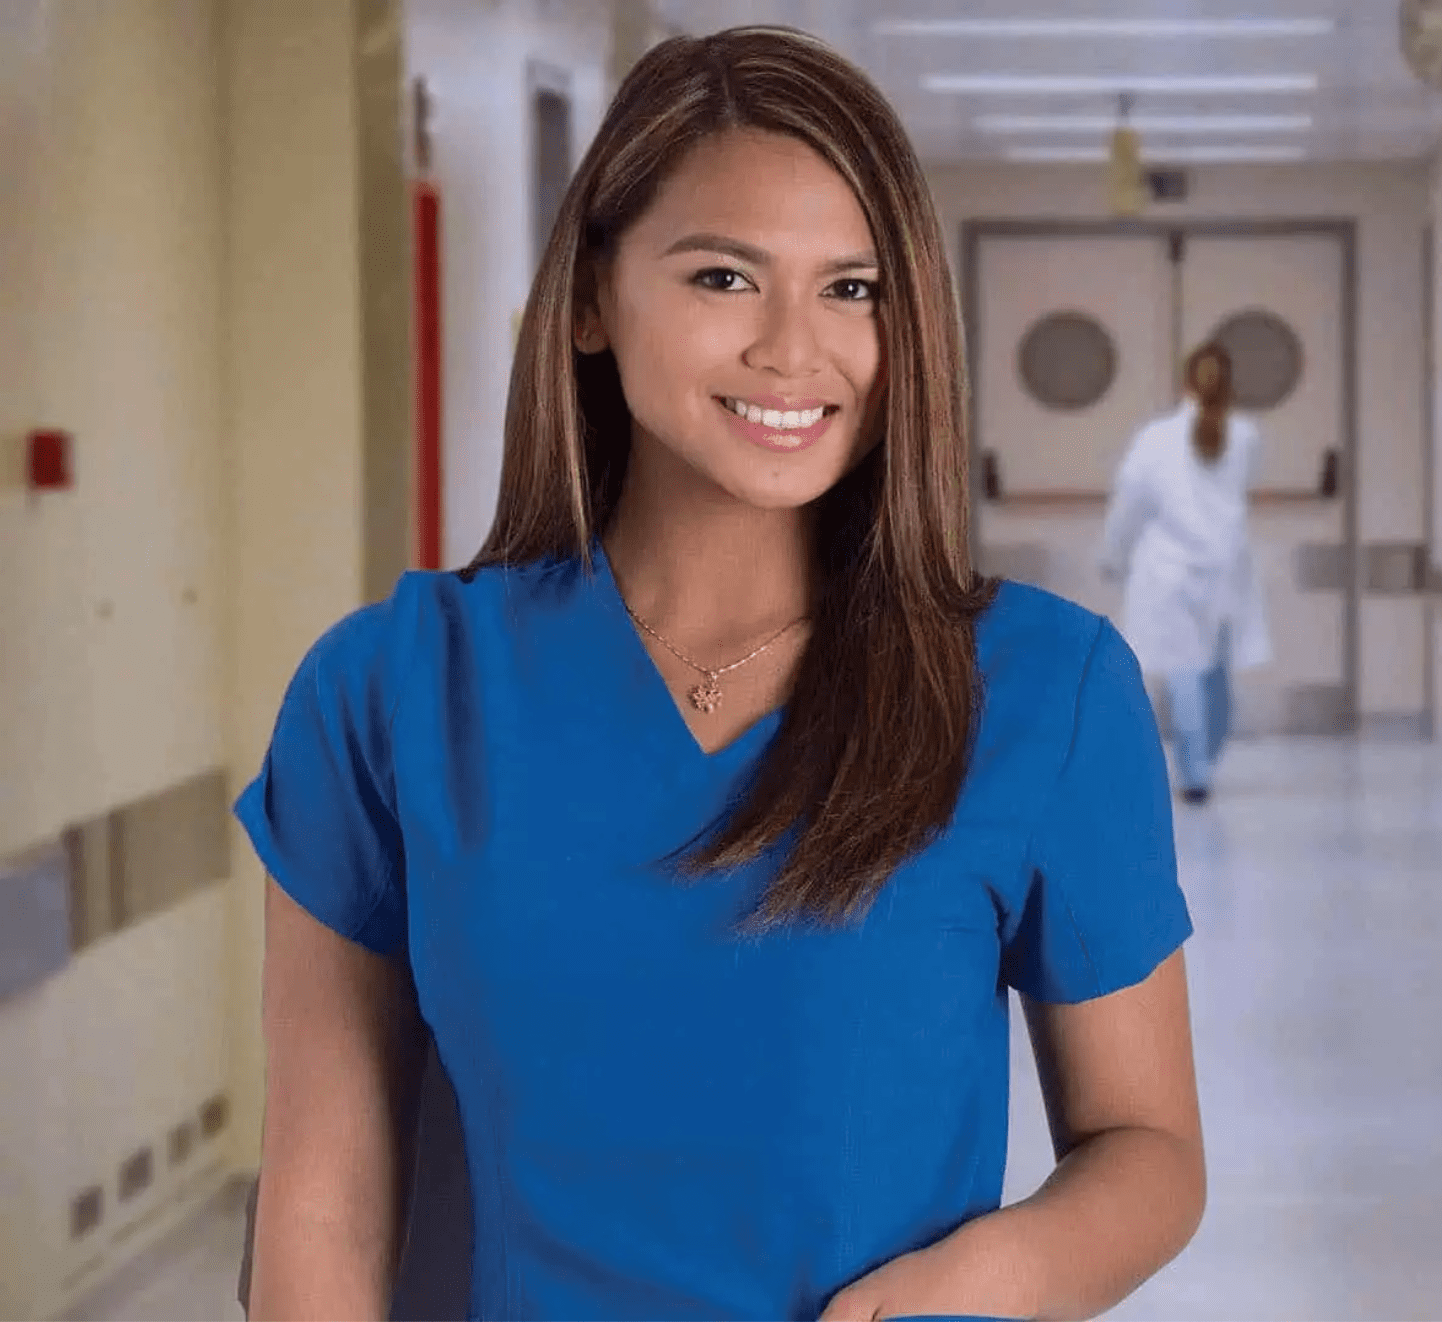 Asian female wearing blue scrubs and smiling